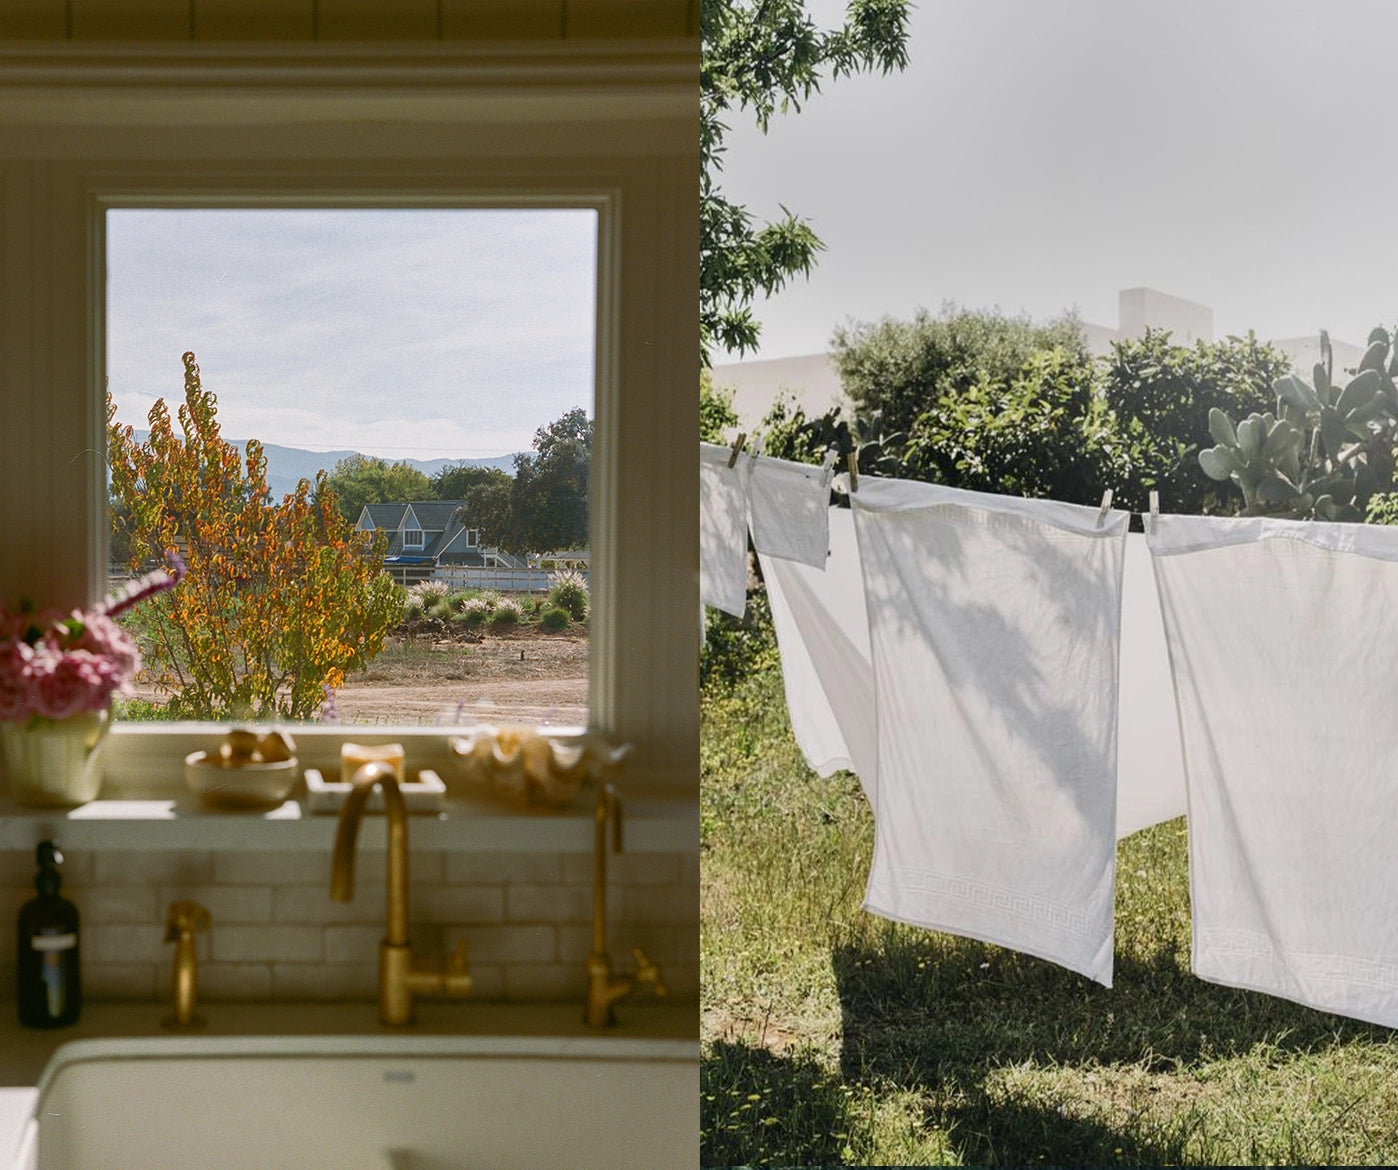 An image from the perspective inside the kitchen of an upscale rural home on the left, on the right is an image of white sheets hanging on a clothesline, blowing in the wind.